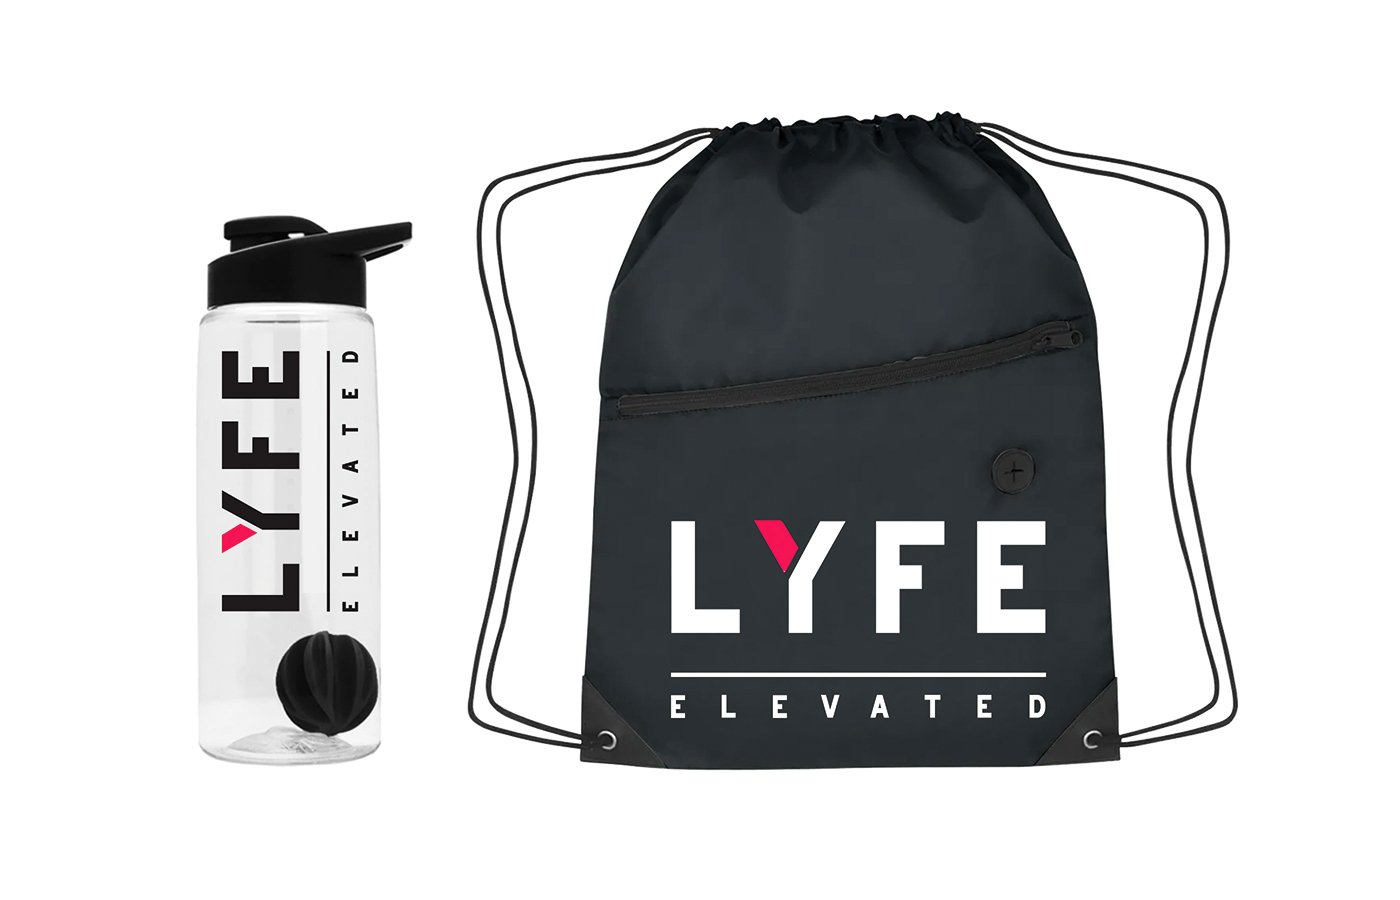 Dalya Kandil designed logos and product packaging for LyfeElevated, Micheal Ulisse contributed to marketing and formulations